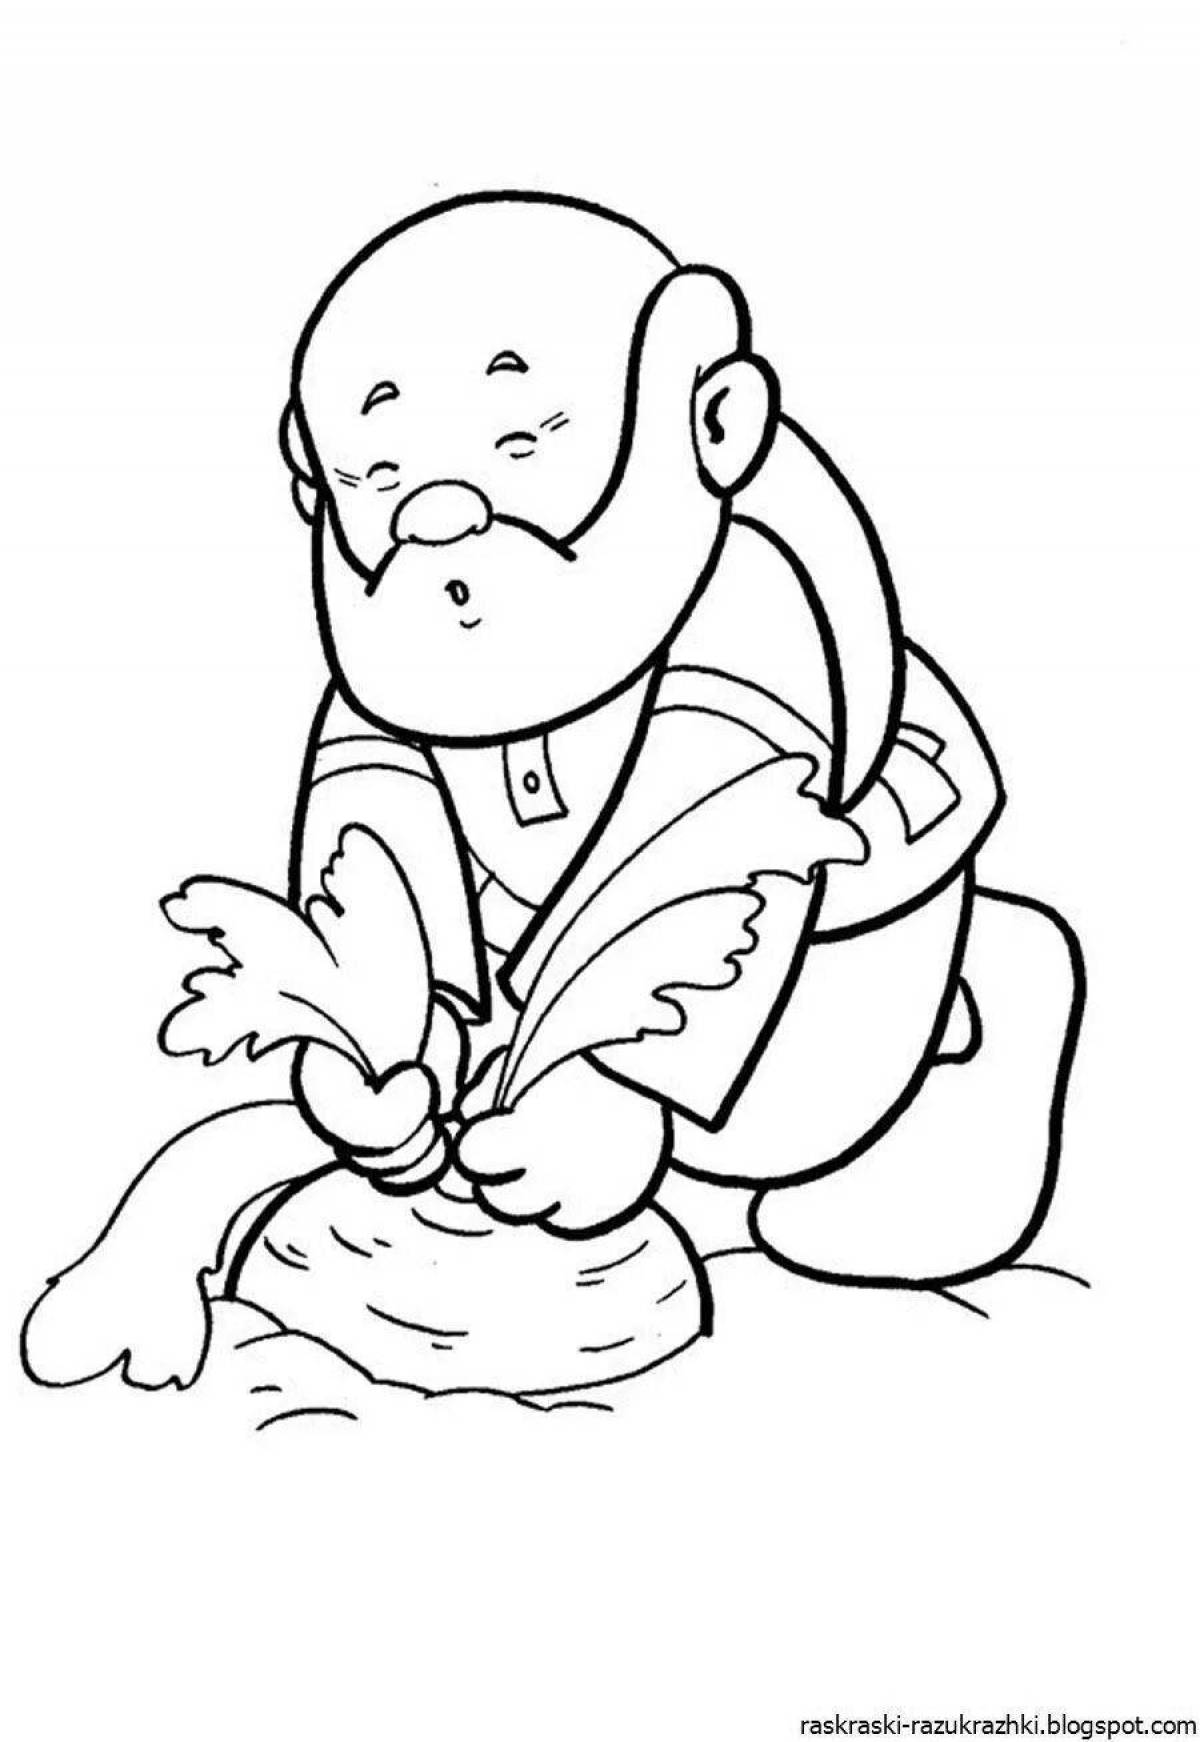 Attractive grandfather coloring book for kids